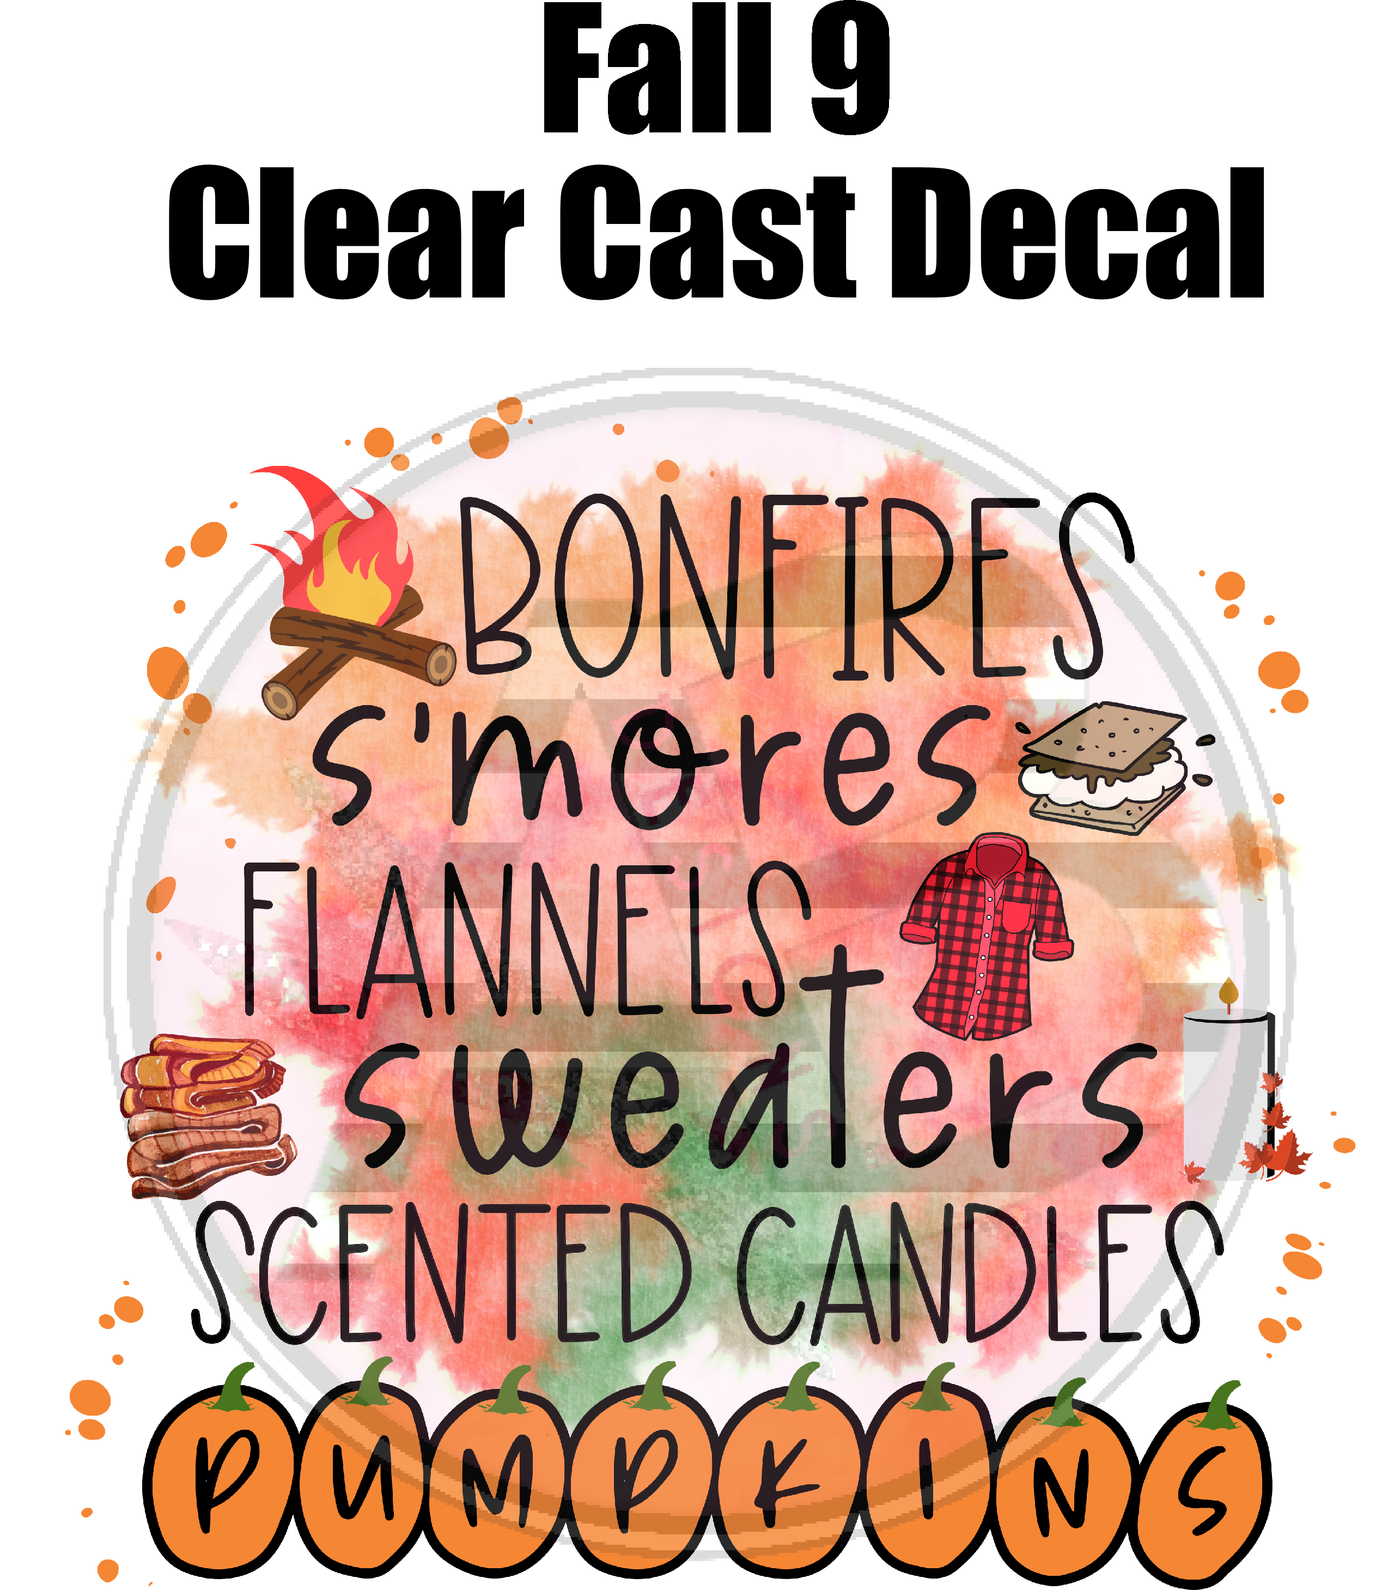 Fall 09 - Clear Cast Decal